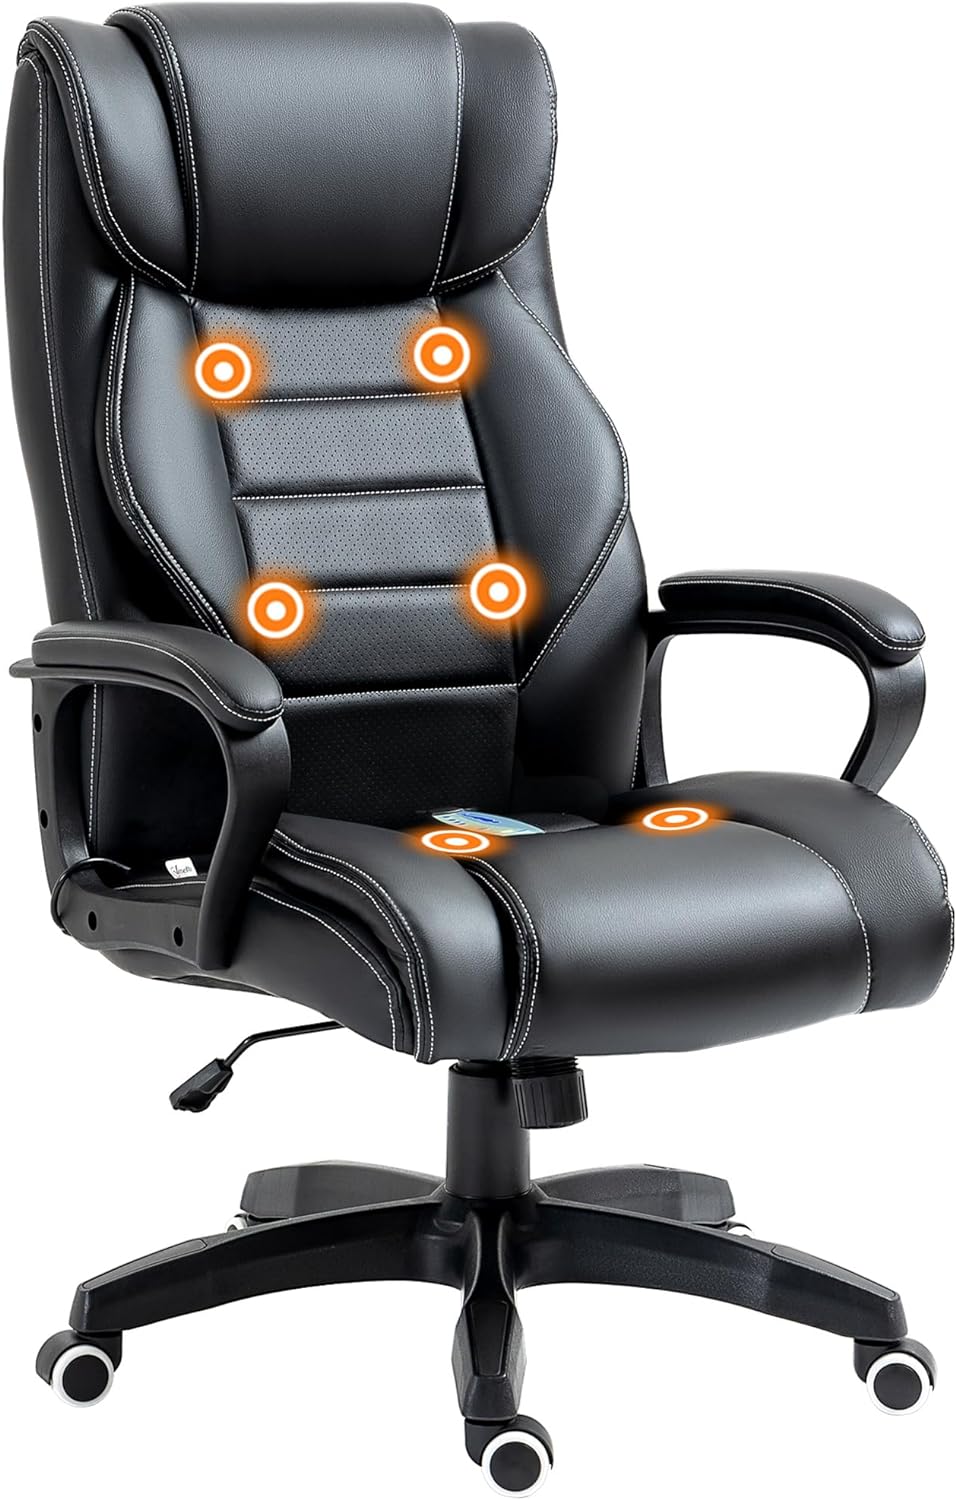 ProperAV Extra Ergonomic High Back Tilting Executive Office Chair with 6-Point Vibration Massage Function - maplin.co.uk